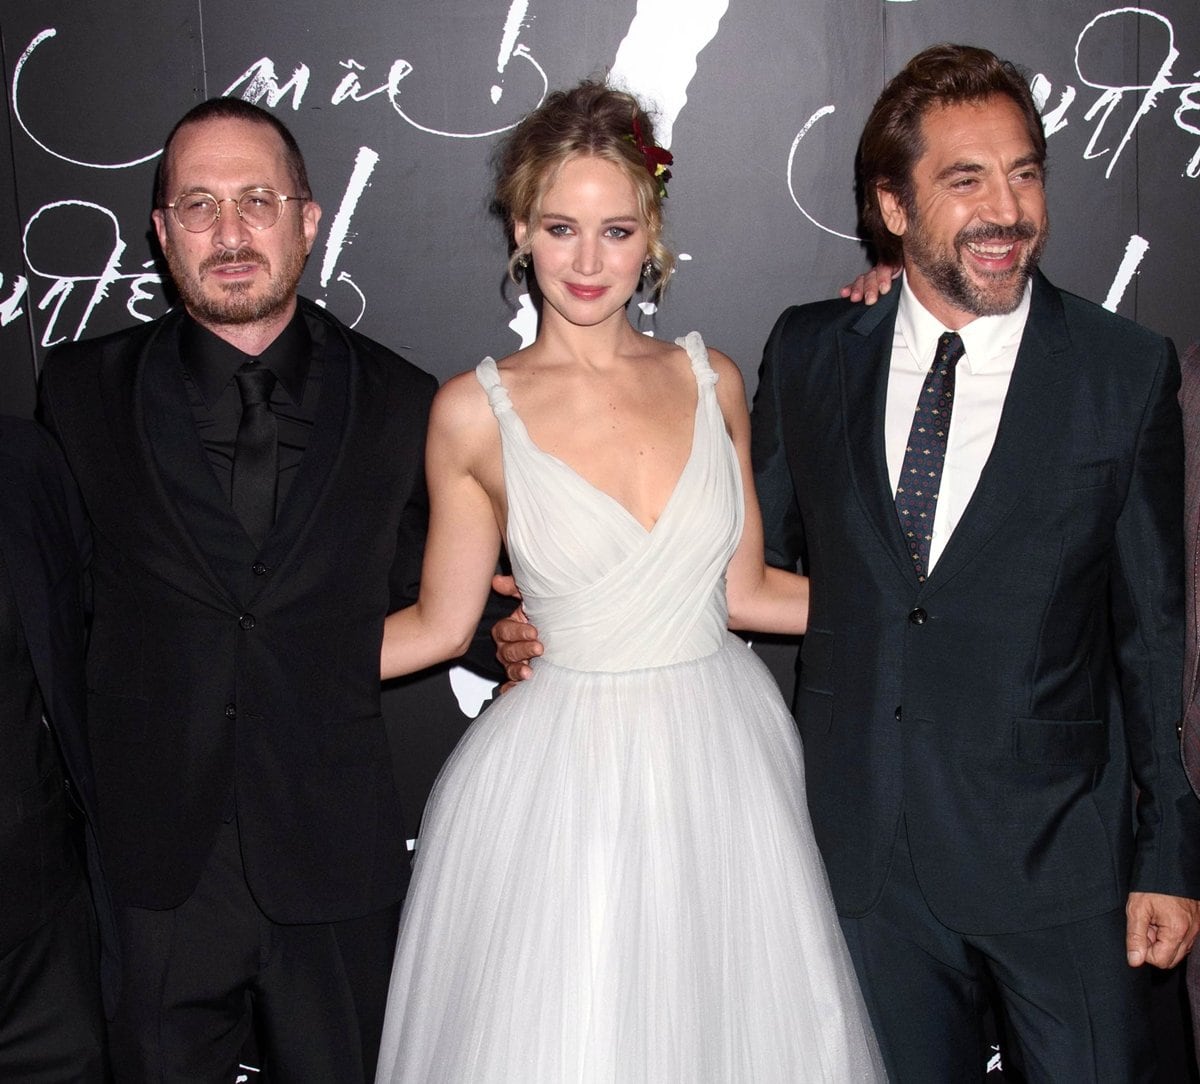 Director Darren Aronofsky, Jennifer Lawrence in a white Dior dress, and Javier Bardem attend the "mother!" New York premiere